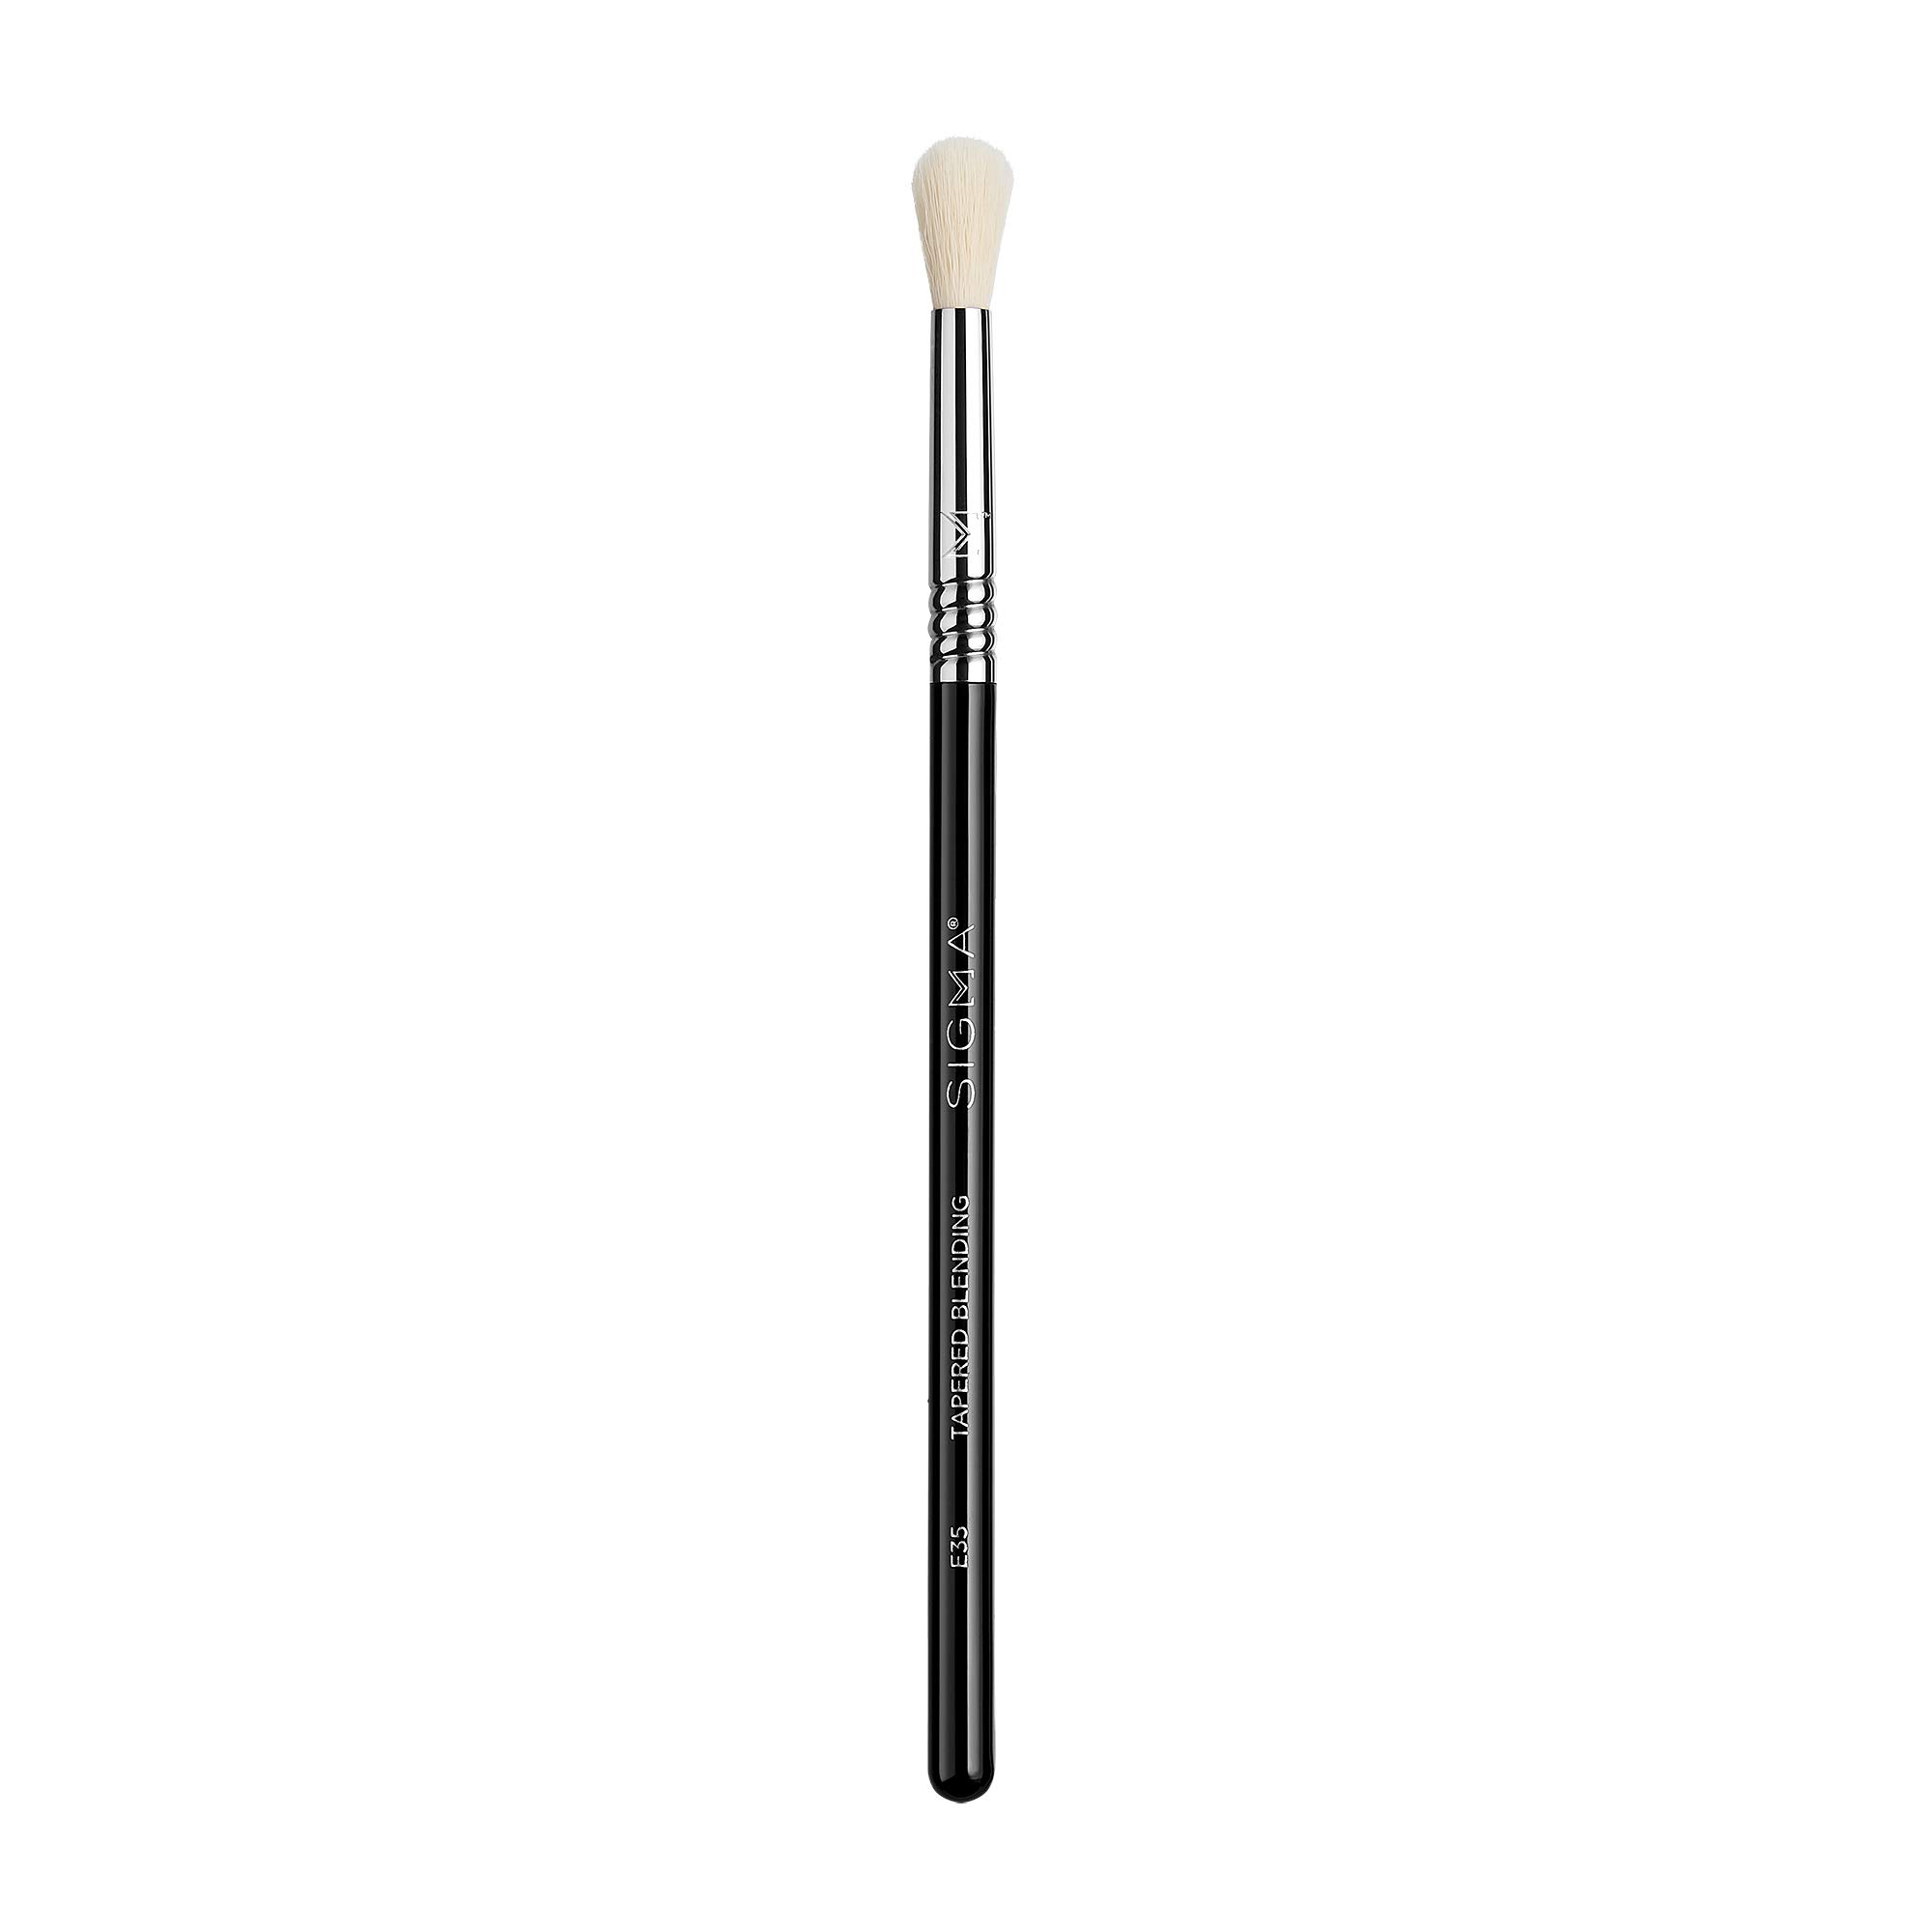 Sigma Beauty Professional E35 Tapered Blending Synthetic Eye Makeup Brush with SigmaTech® fibers for Highlighting, Lining and Blending Eyes